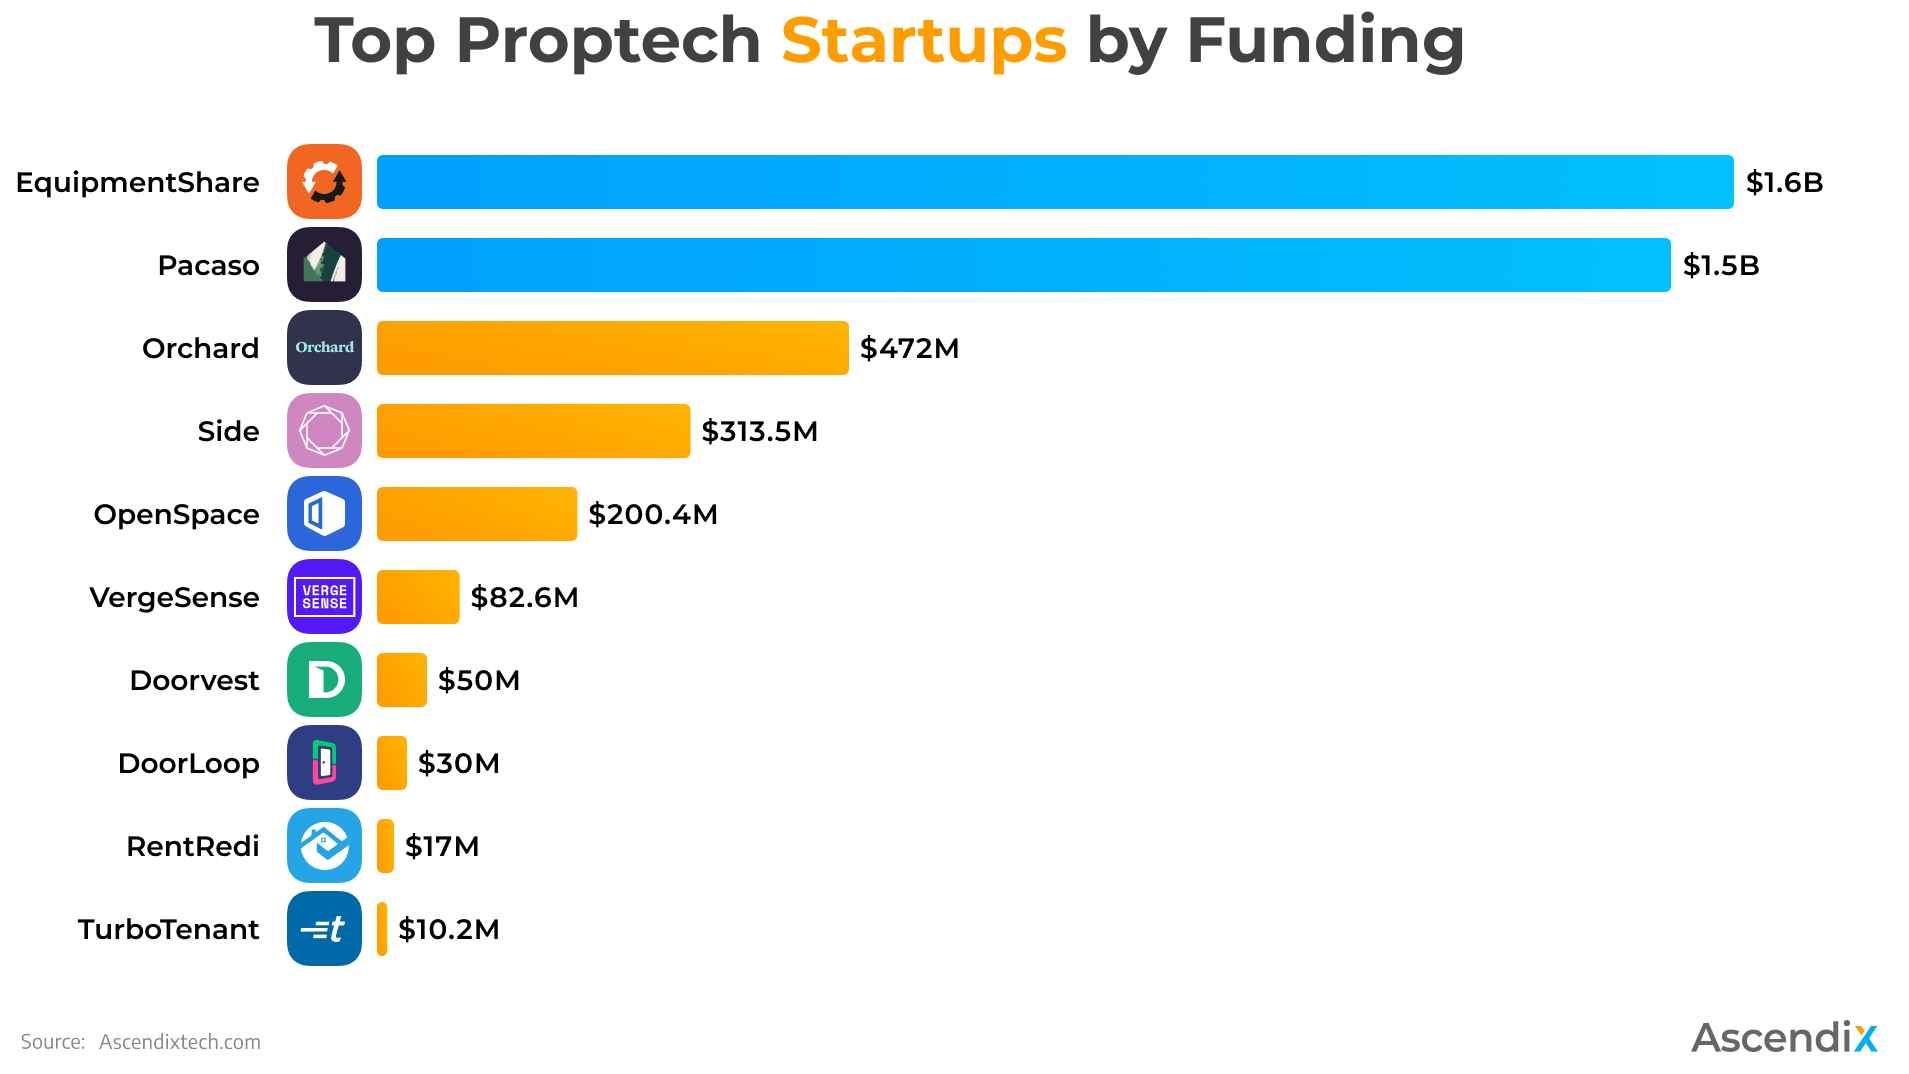 Top Proptech Startups by Funding